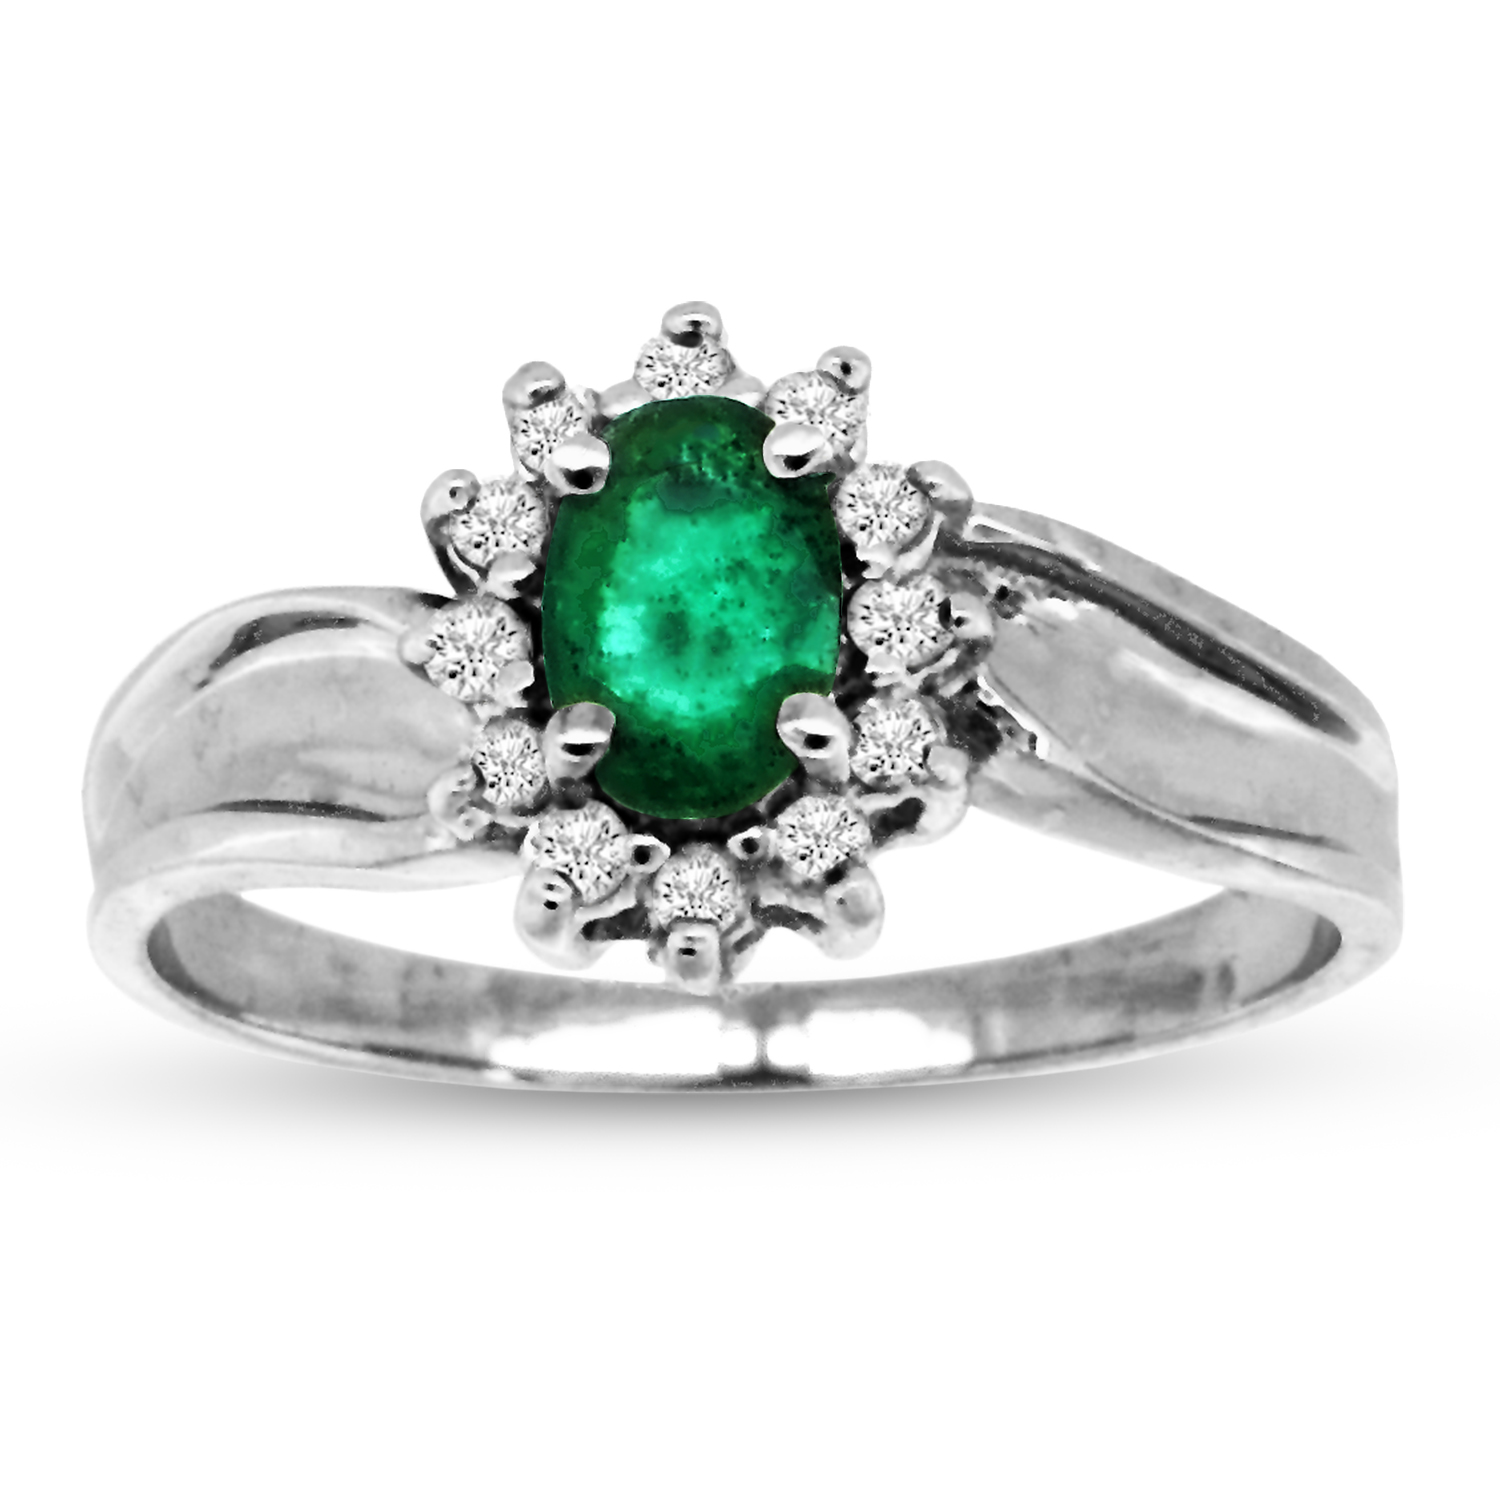 0.55cttw Emerald and Fashion Diamond Ring set in 14k Gold